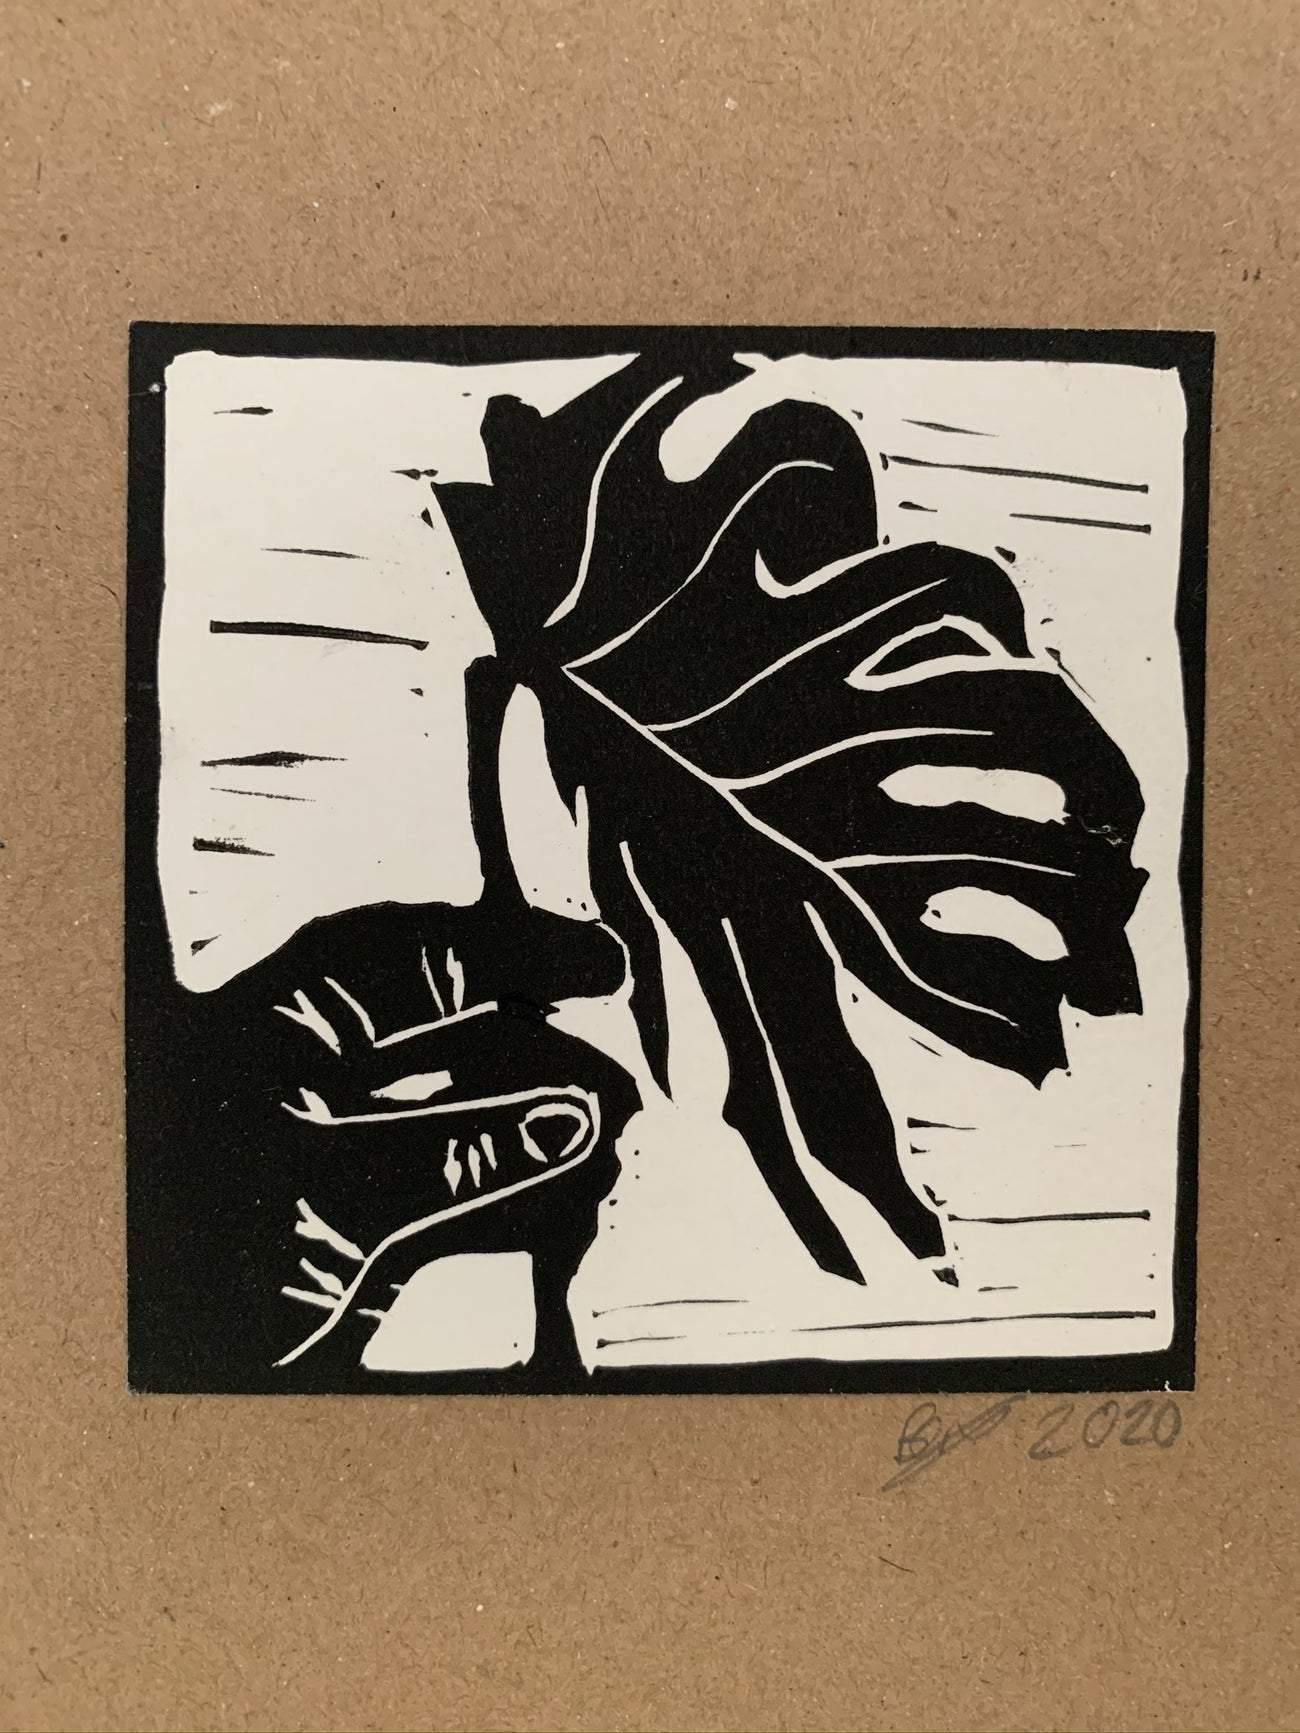 Monochrome print of a cheese plant leaf from the greetings card 